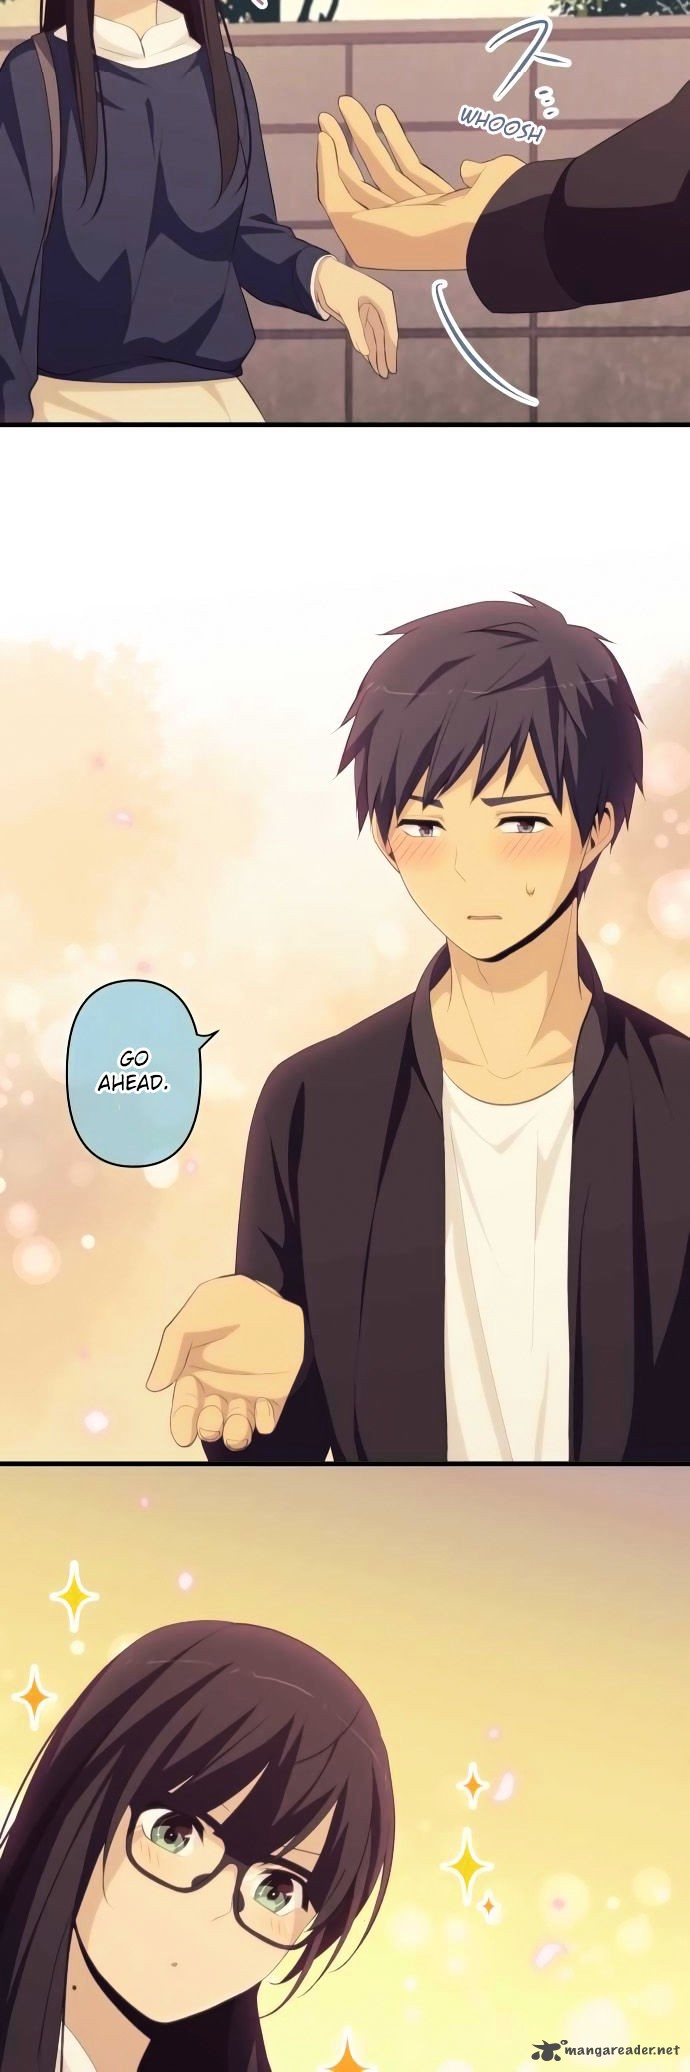 Relife 175 21